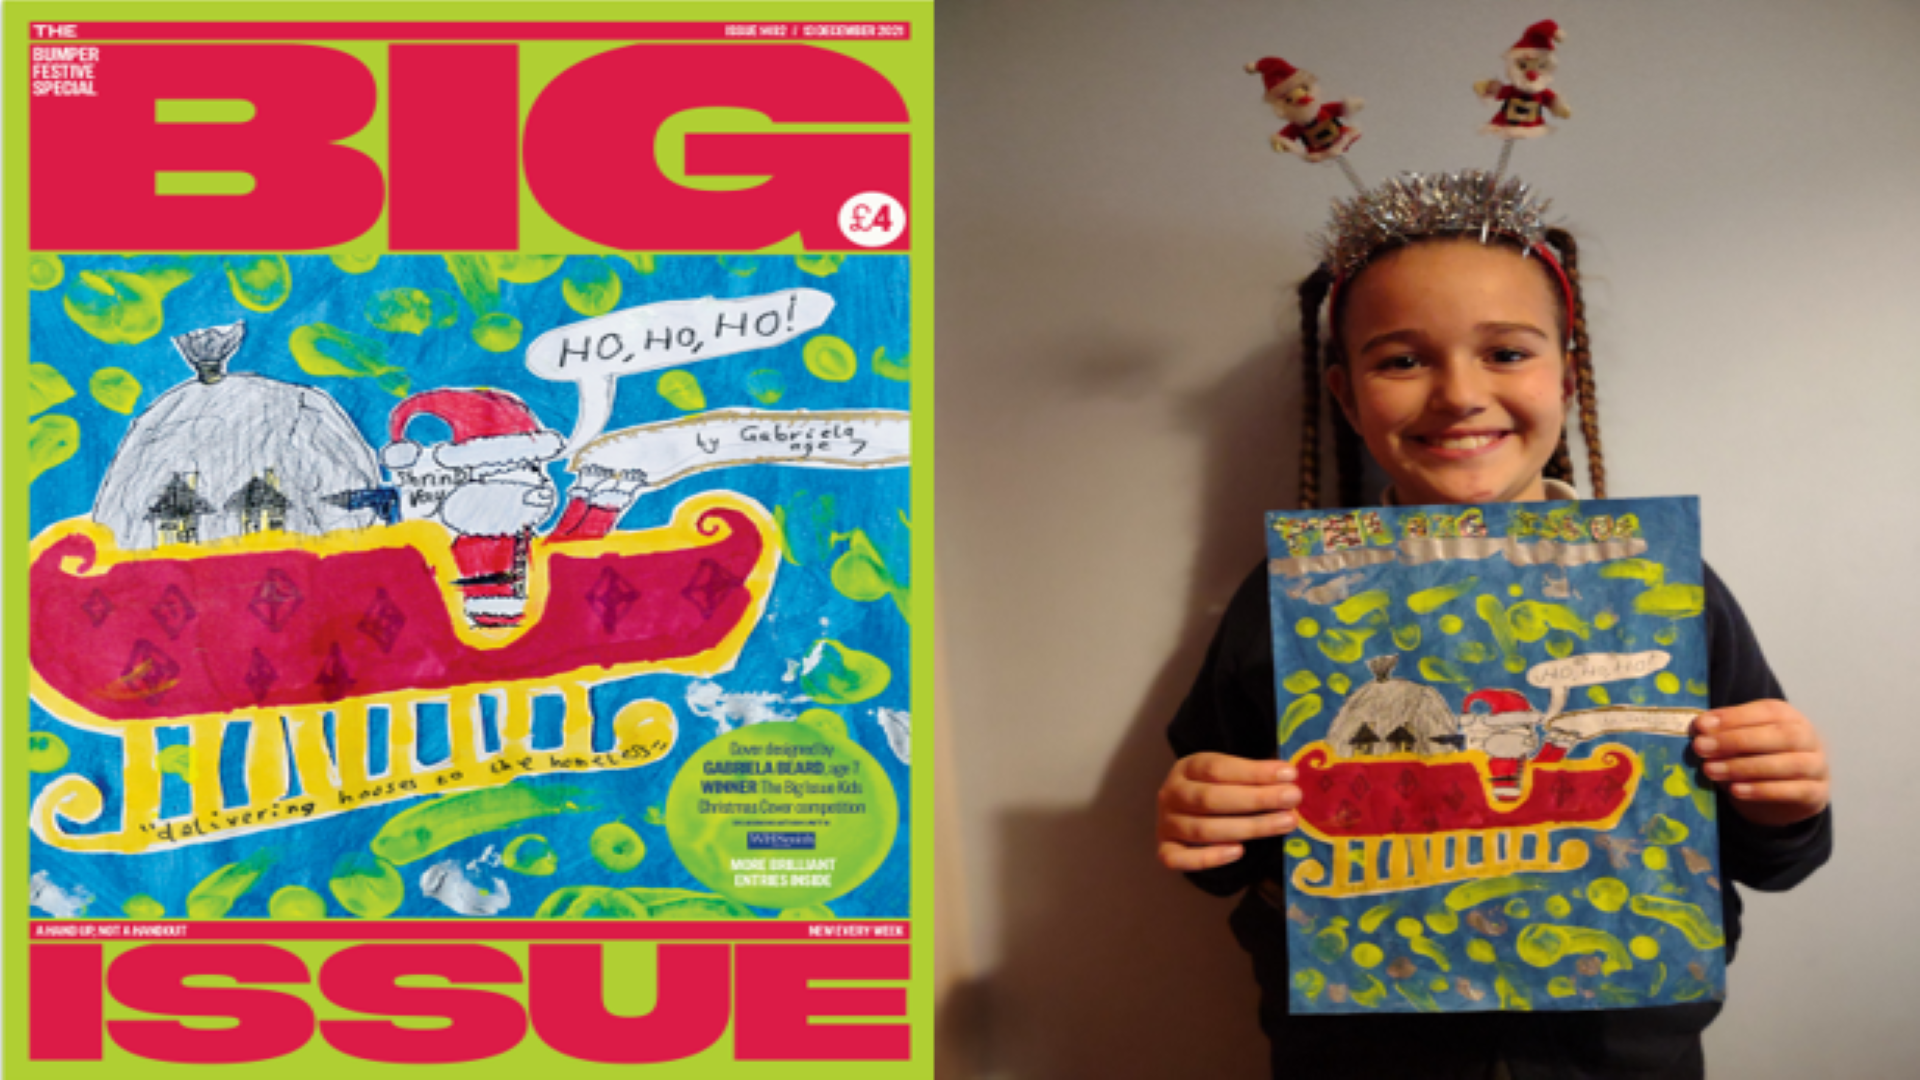 Gabriela Beard, winner of kids cover competition, and her design